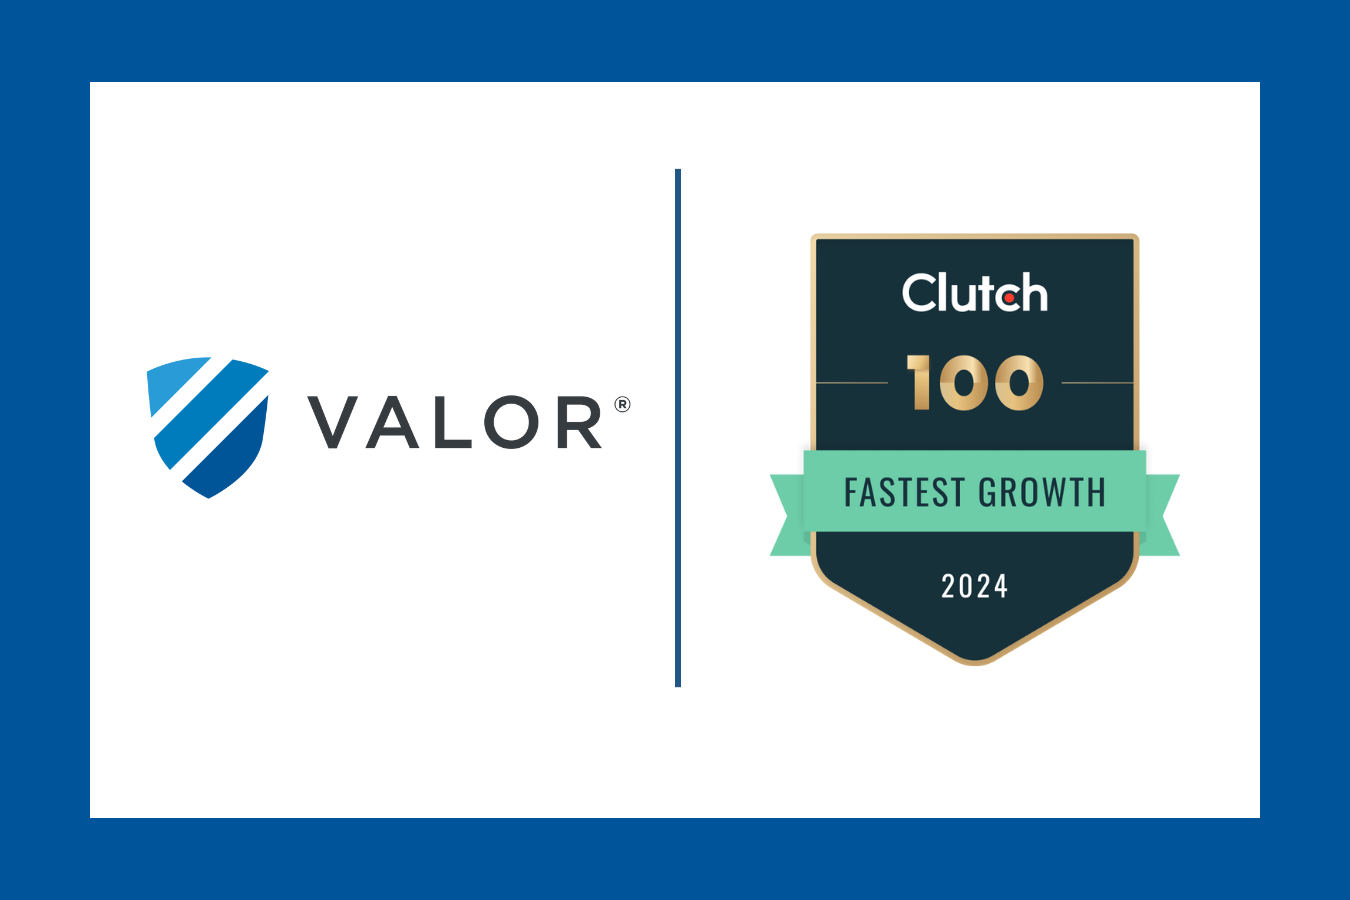 Valor makes Clutch 100 fastest growing companies list